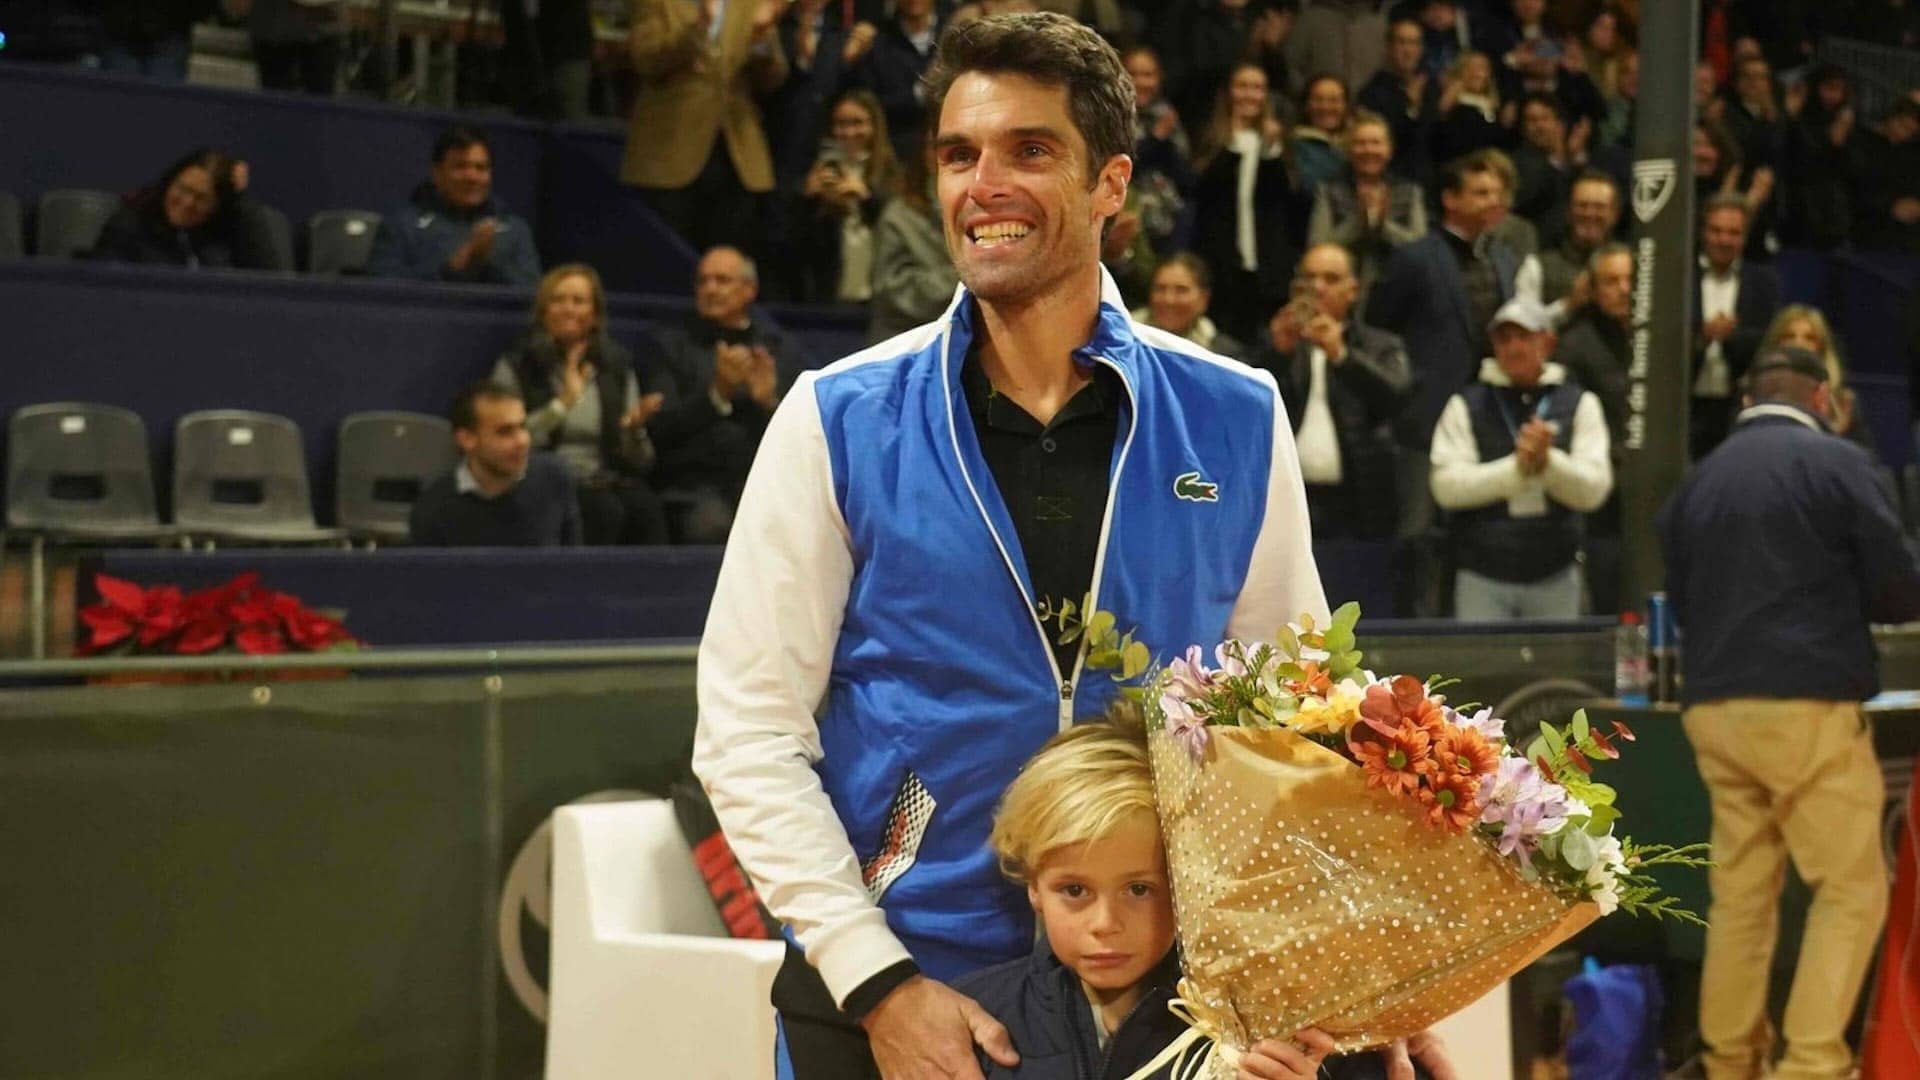 Pablo Andujar after playing his last professional match in Valencia.